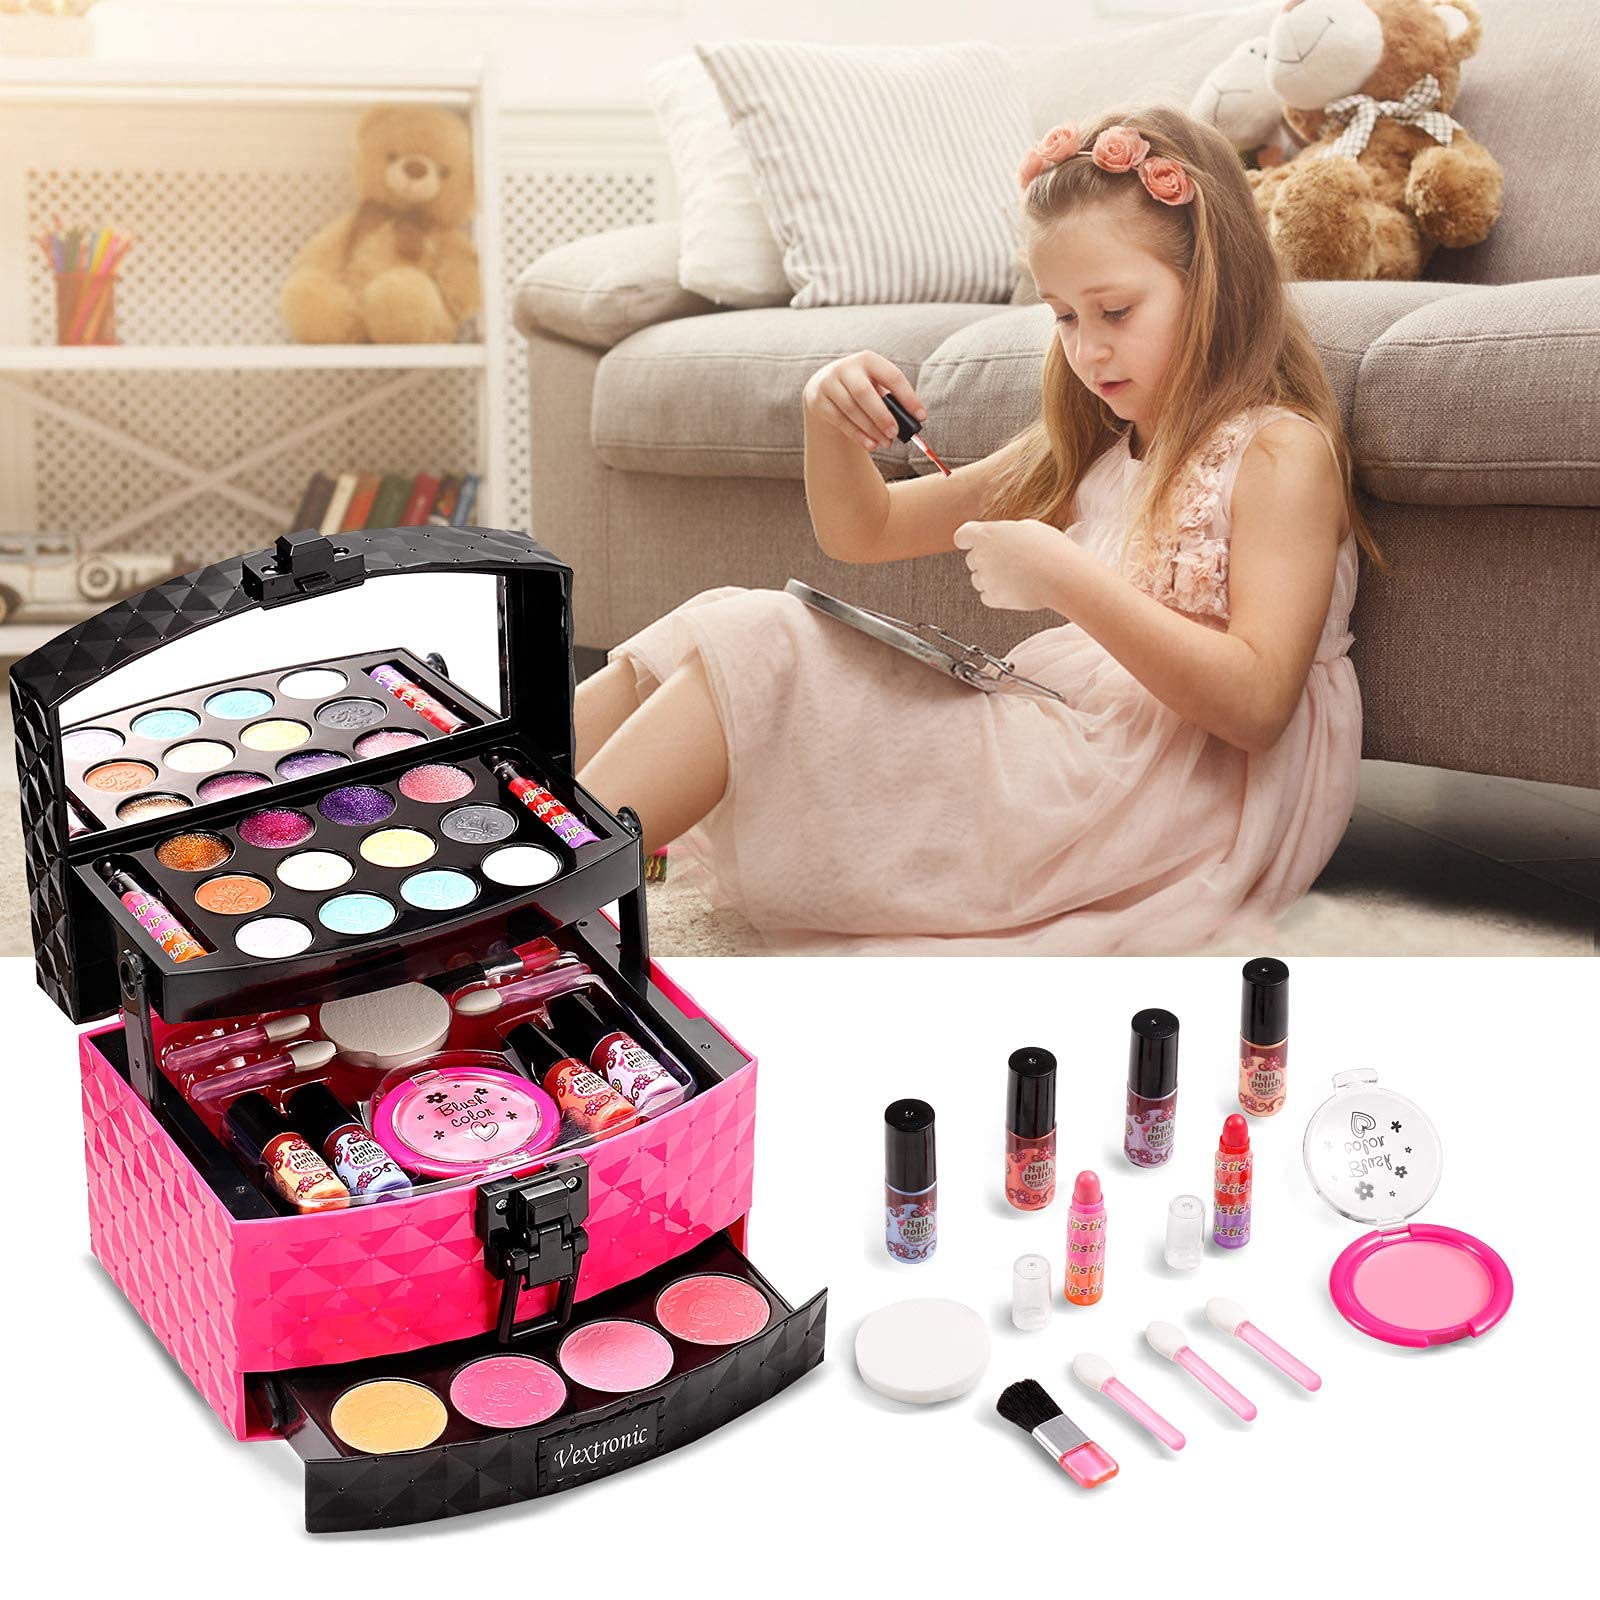 Evjurcn Kids Makeup Toy Kit for Girls Washable Makeup Set Toy Pretend Play Makeup Beauty Set for Toddler Young Children Pretend Play Set Vanity for